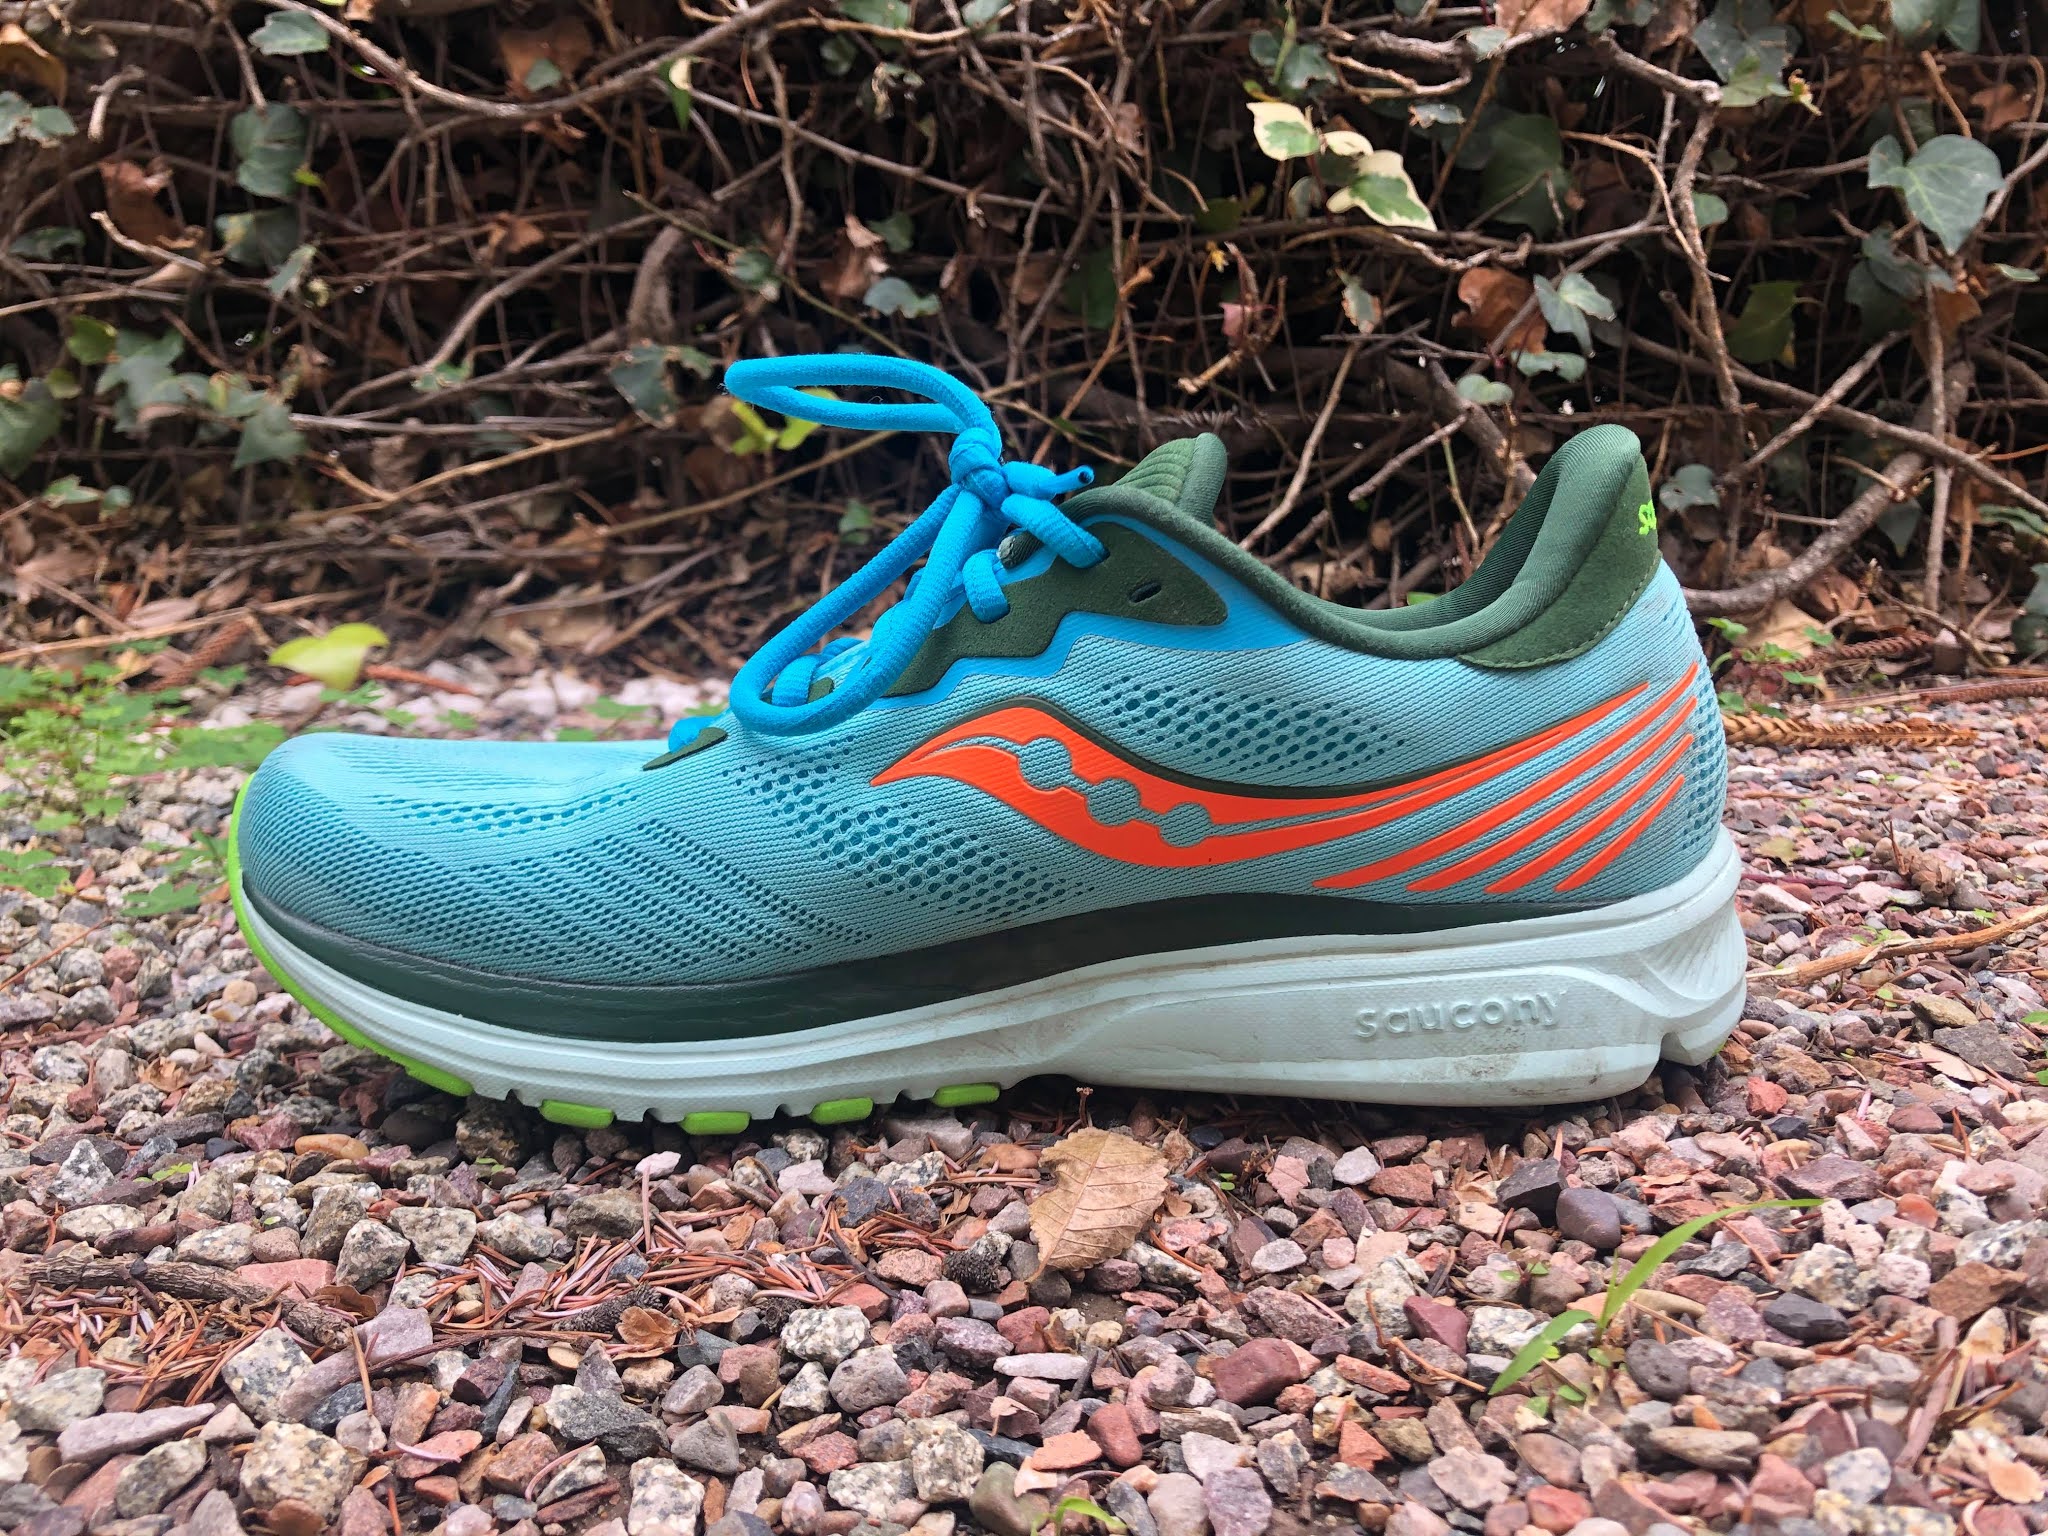 Saucony Ride 14 Multiple Tester Review - DOCTORS OF RUNNING